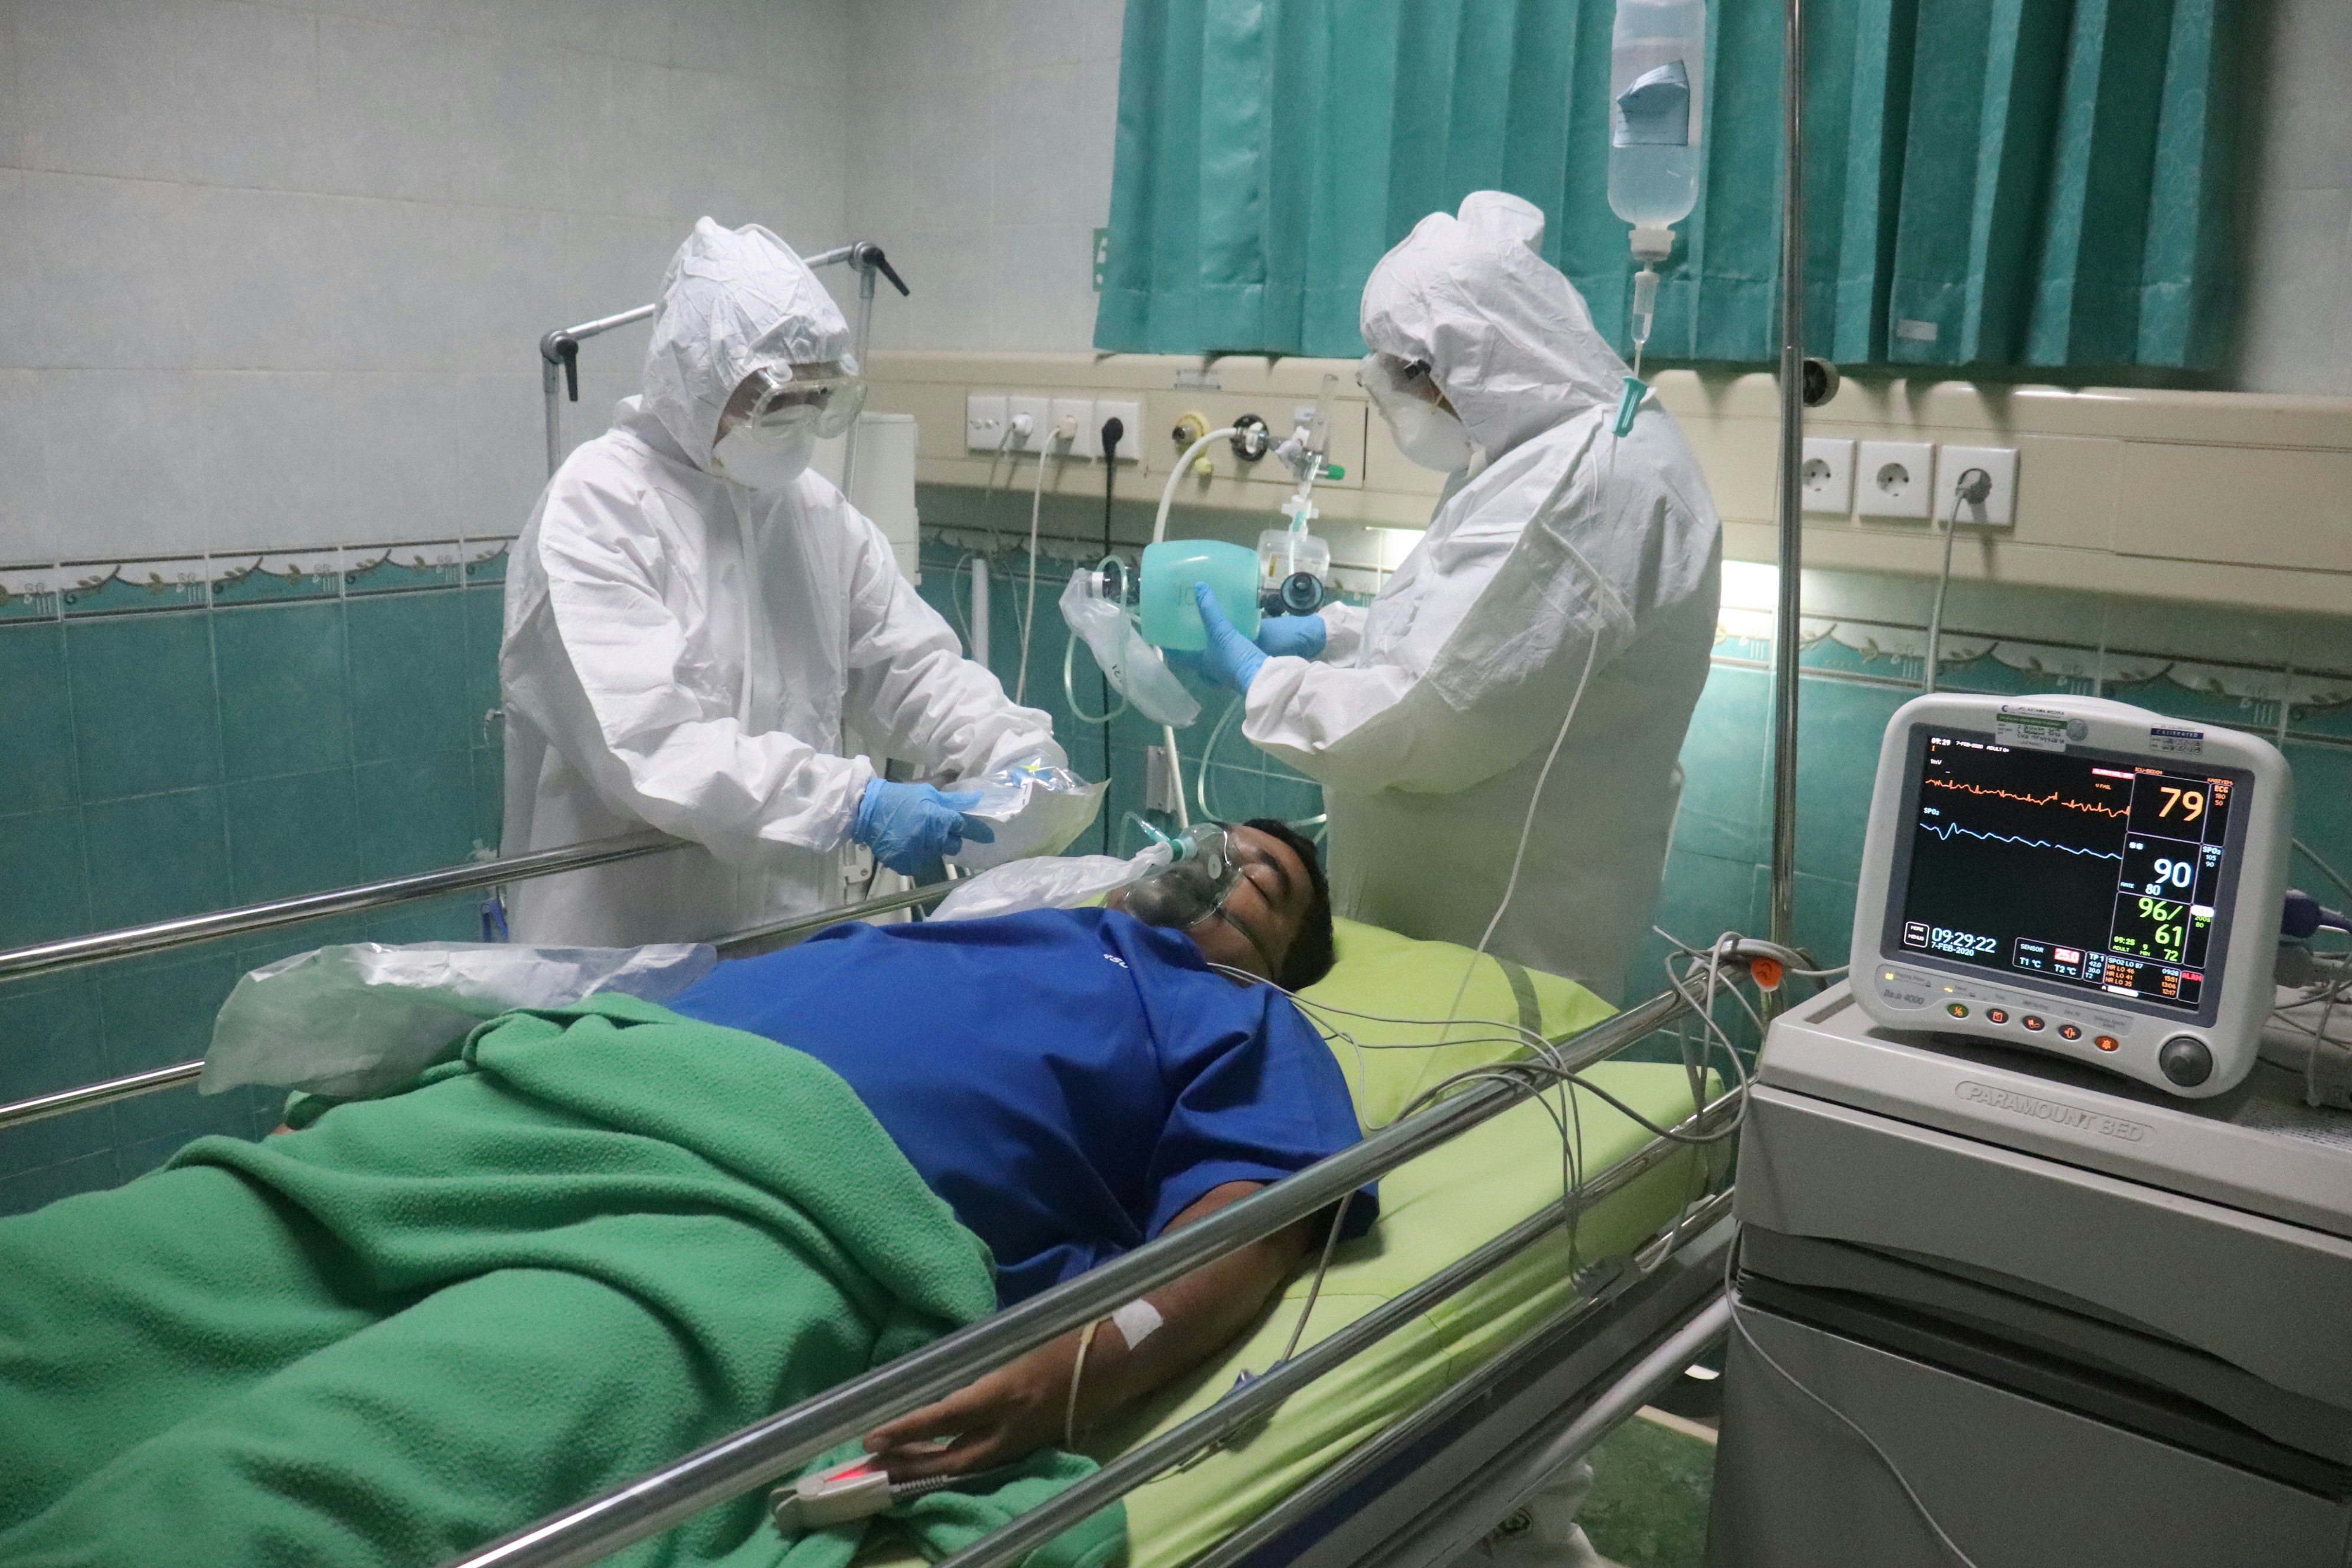 simulated covid-19 patients are in the ICU room</p>
<p>*) Gambar Pasien adalah model, bukan pasien yg sebenarnya. karena ini saat simulasi penanganan covid-19″ style=”max-width:430px;float:left;padding:10px 10px 10px 0px;border:0px;”>Drug addiction is a complex problem with serious consequences for folks and community. Its factors tend to be multi-faceted and need several ways to prevention and treatment. By increasing awareness, improving training, enhancing access to therapy, and applying stricter regulations, society usually takes considerable actions toward reducing the prevalence and effect of medicine addiction. Combating medication addiction necessitates collective attempts from governing bodies, medical experts, communities, and folks to mitigate its results and provide assistance to those affected.</p>
    </div>
    <div class=